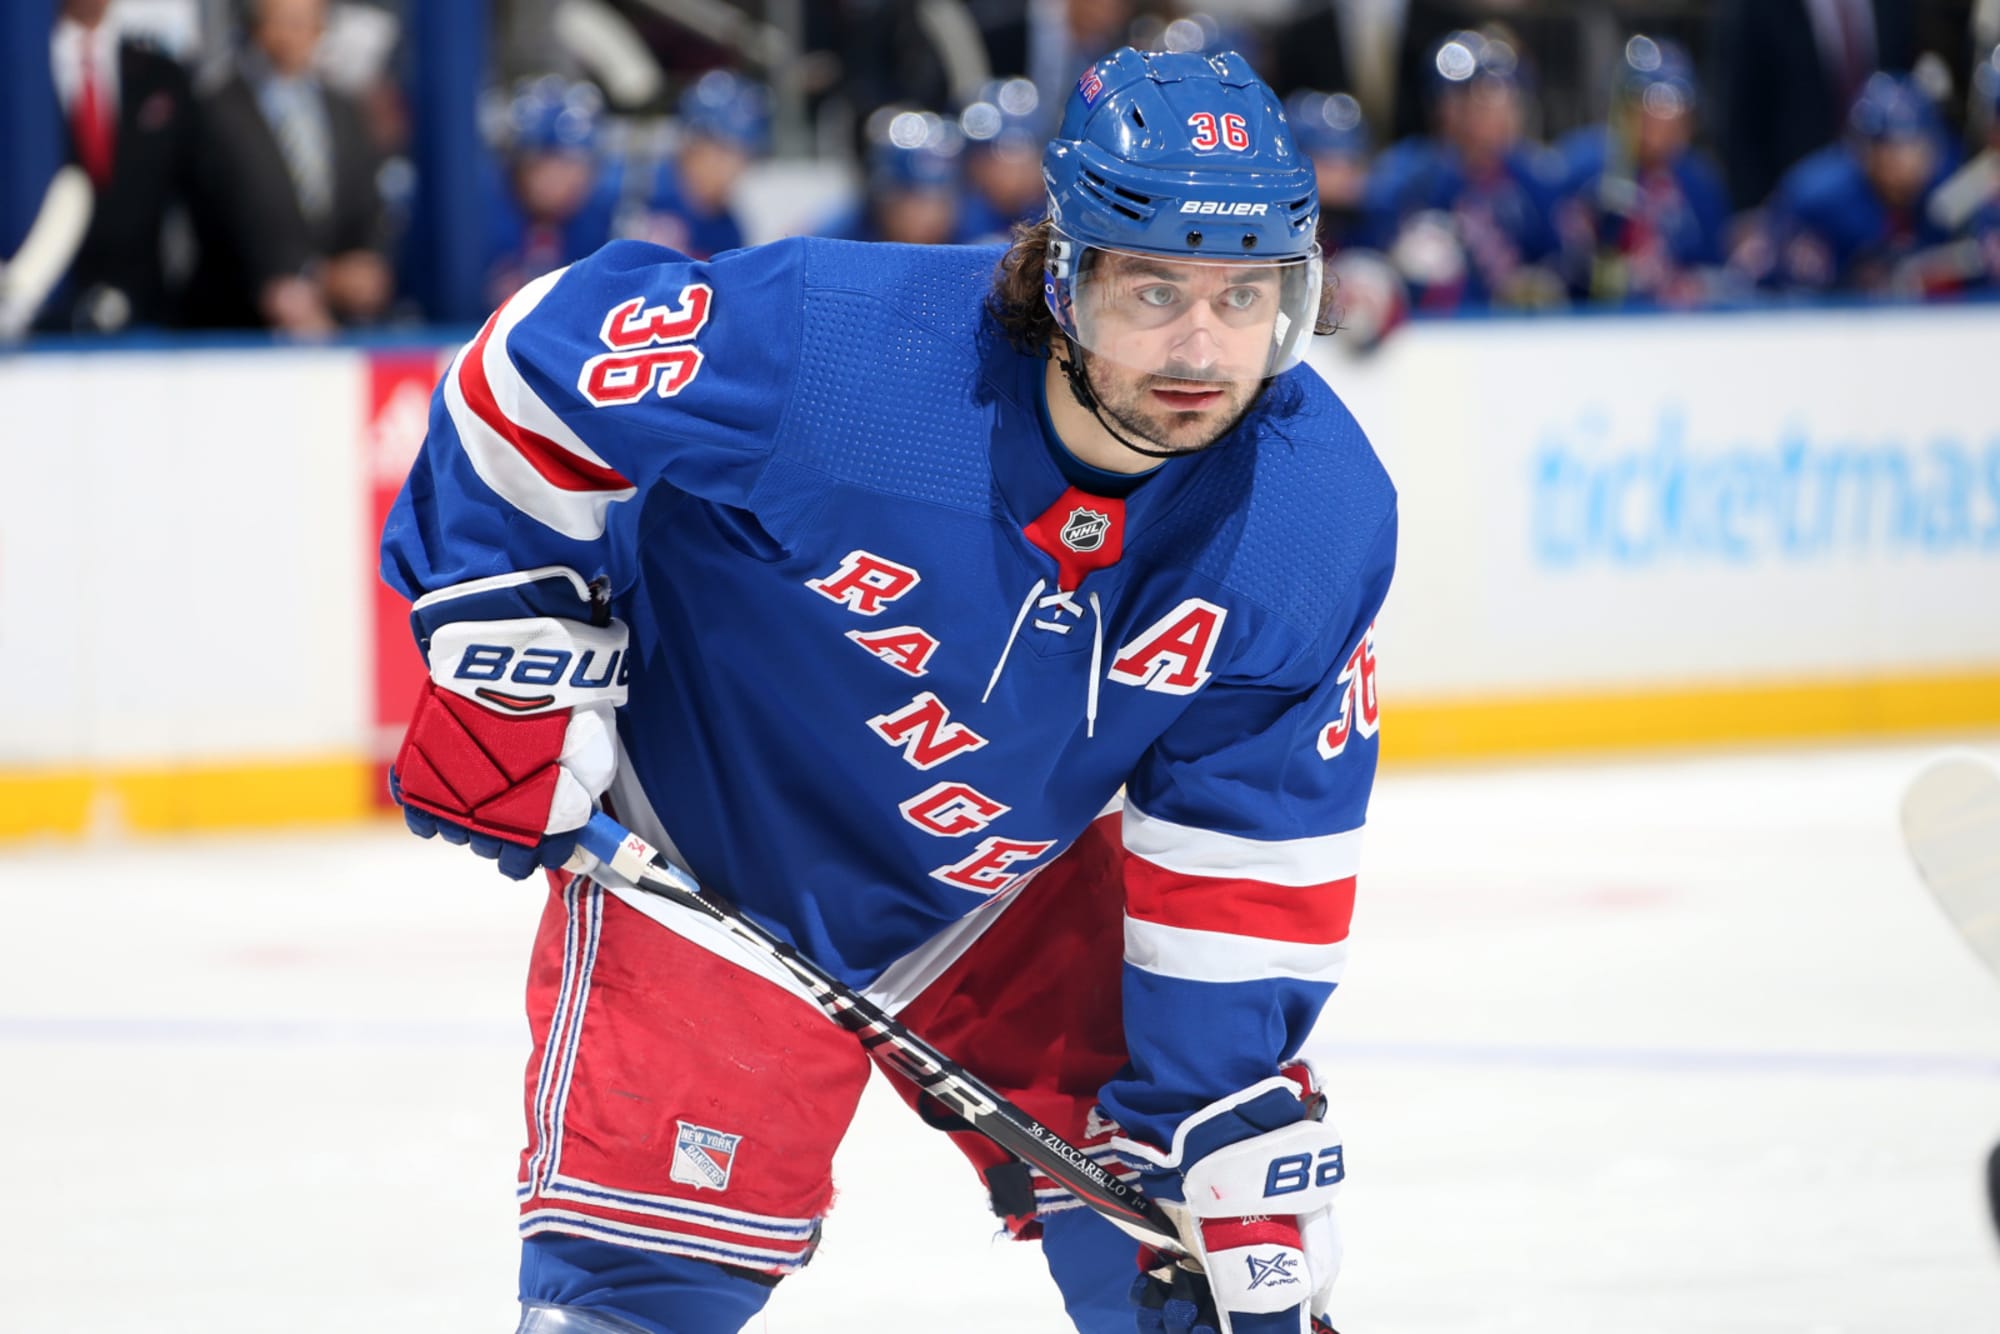 Rangers Trade Mats Zuccarello to Stars for 2 Draft Picks - The New